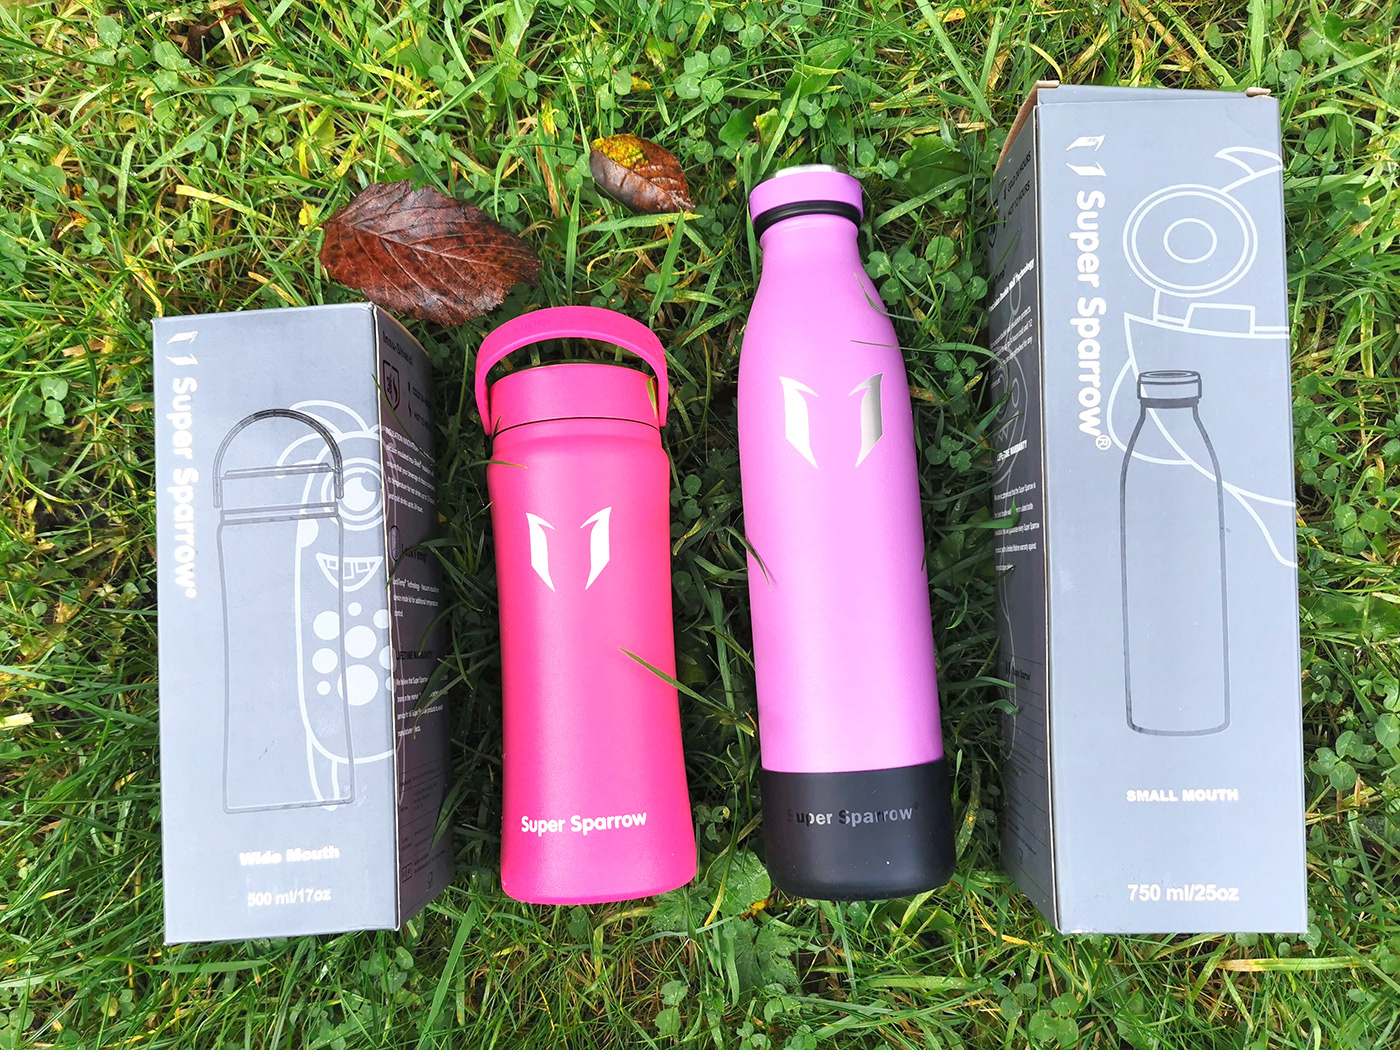 Super Sparrow Insulated Water Bottle - Full Review 